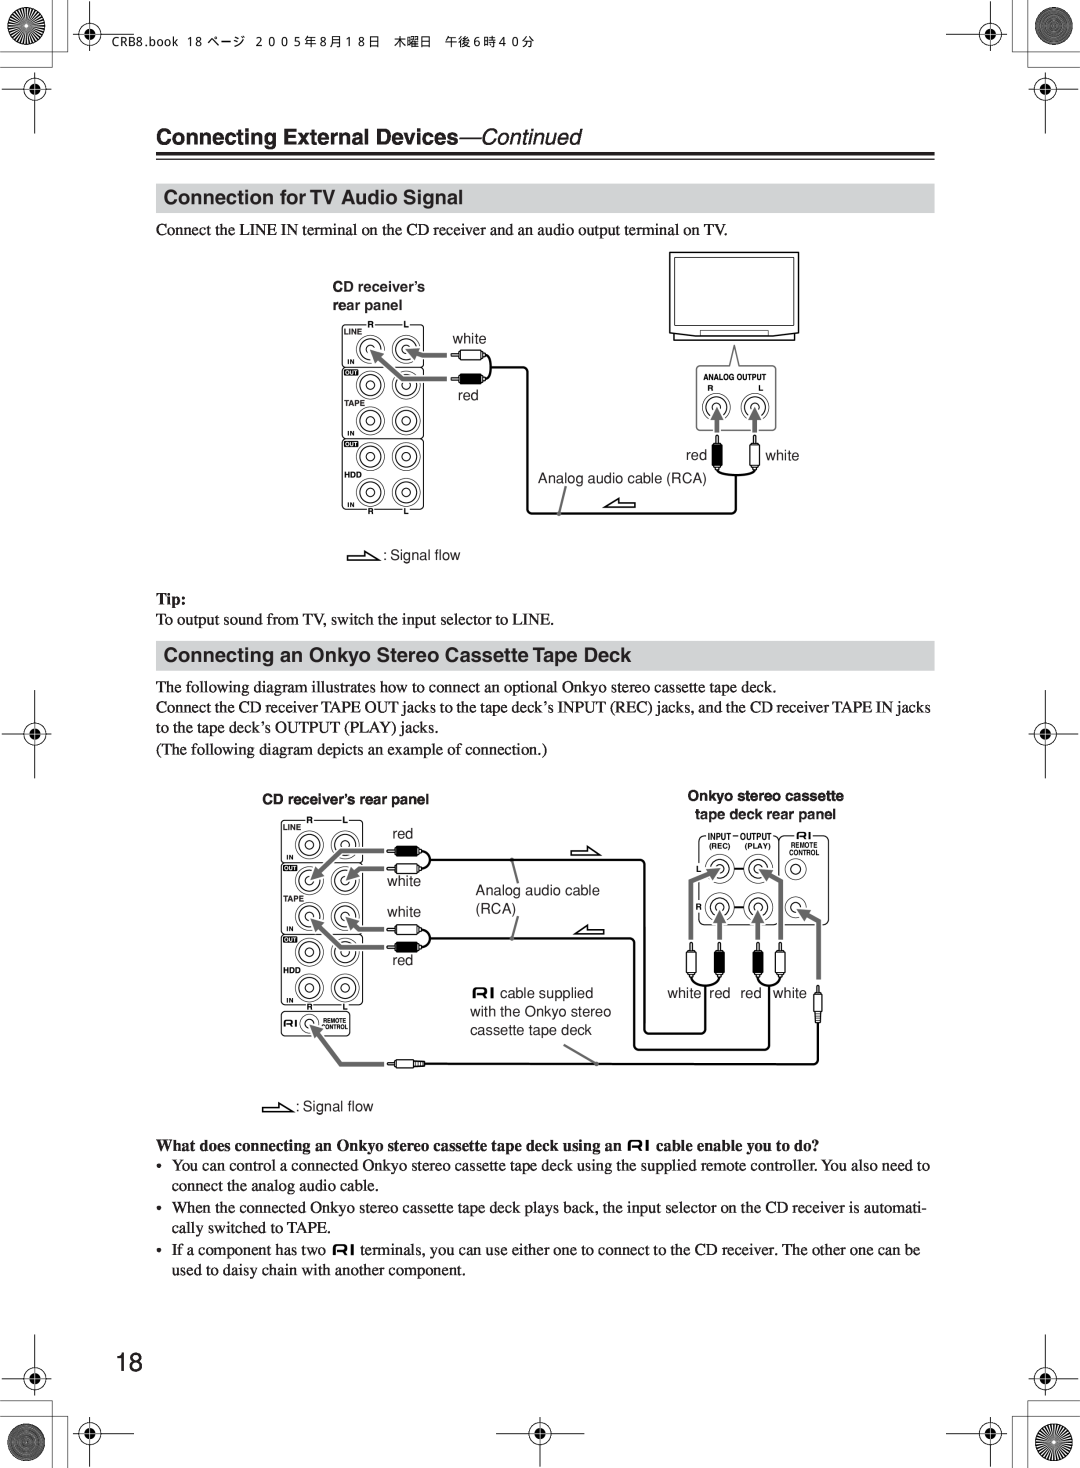 Onkyo CR-B8 instruction manual Connecting External Devices-Continued, Connection for TV Audio Signal 